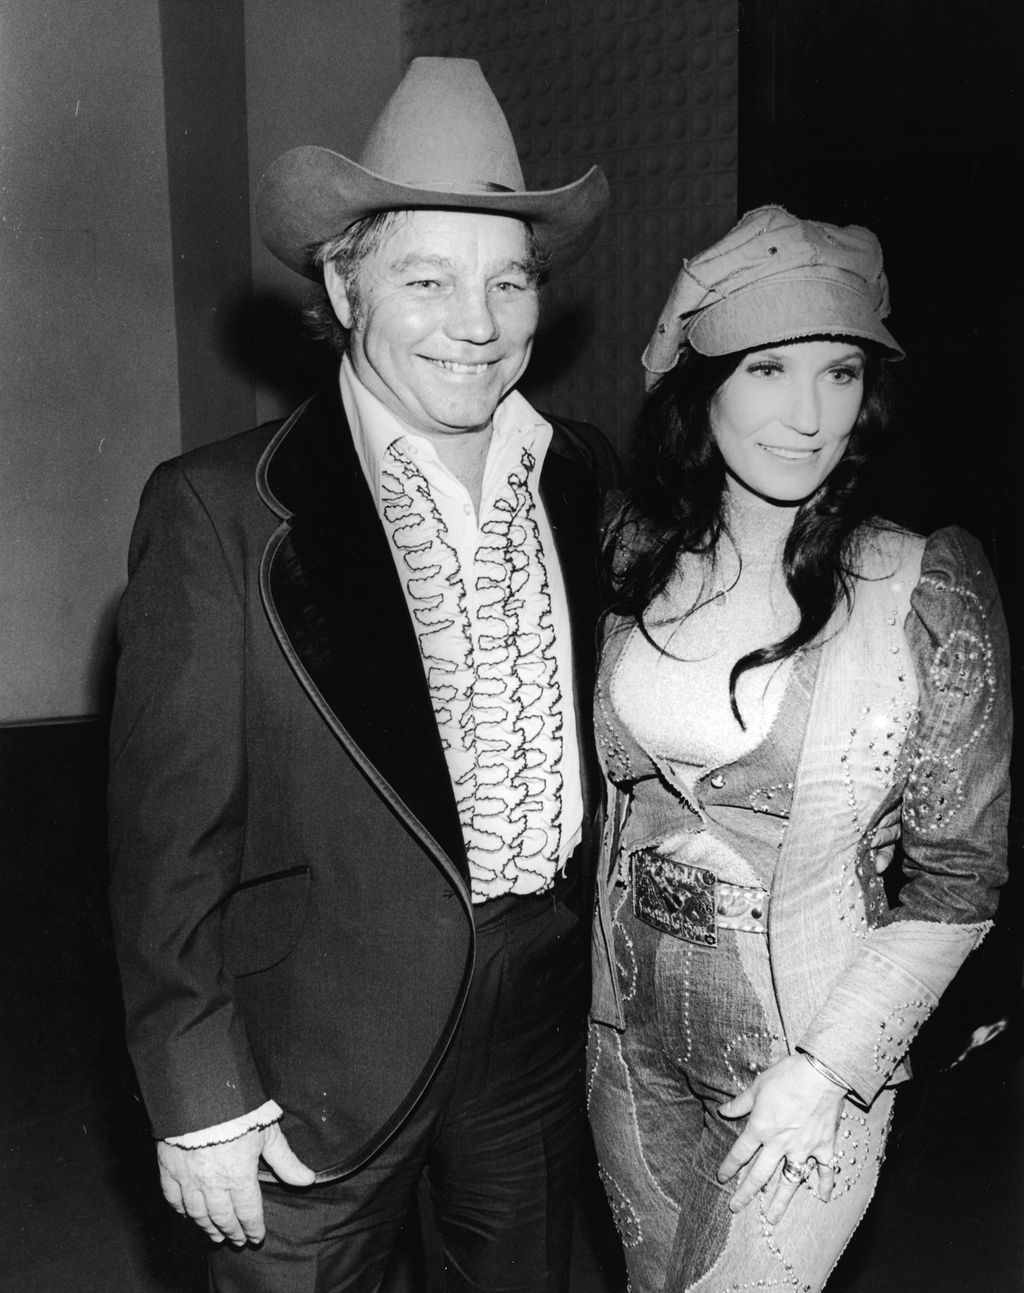 Loretta Lynn and her husband Oliver Lynn, Jr. (also known as Mooney) at the Country & Western Music Awards, Hollywood, California, February 27, 1975. | Source: Getty Images.